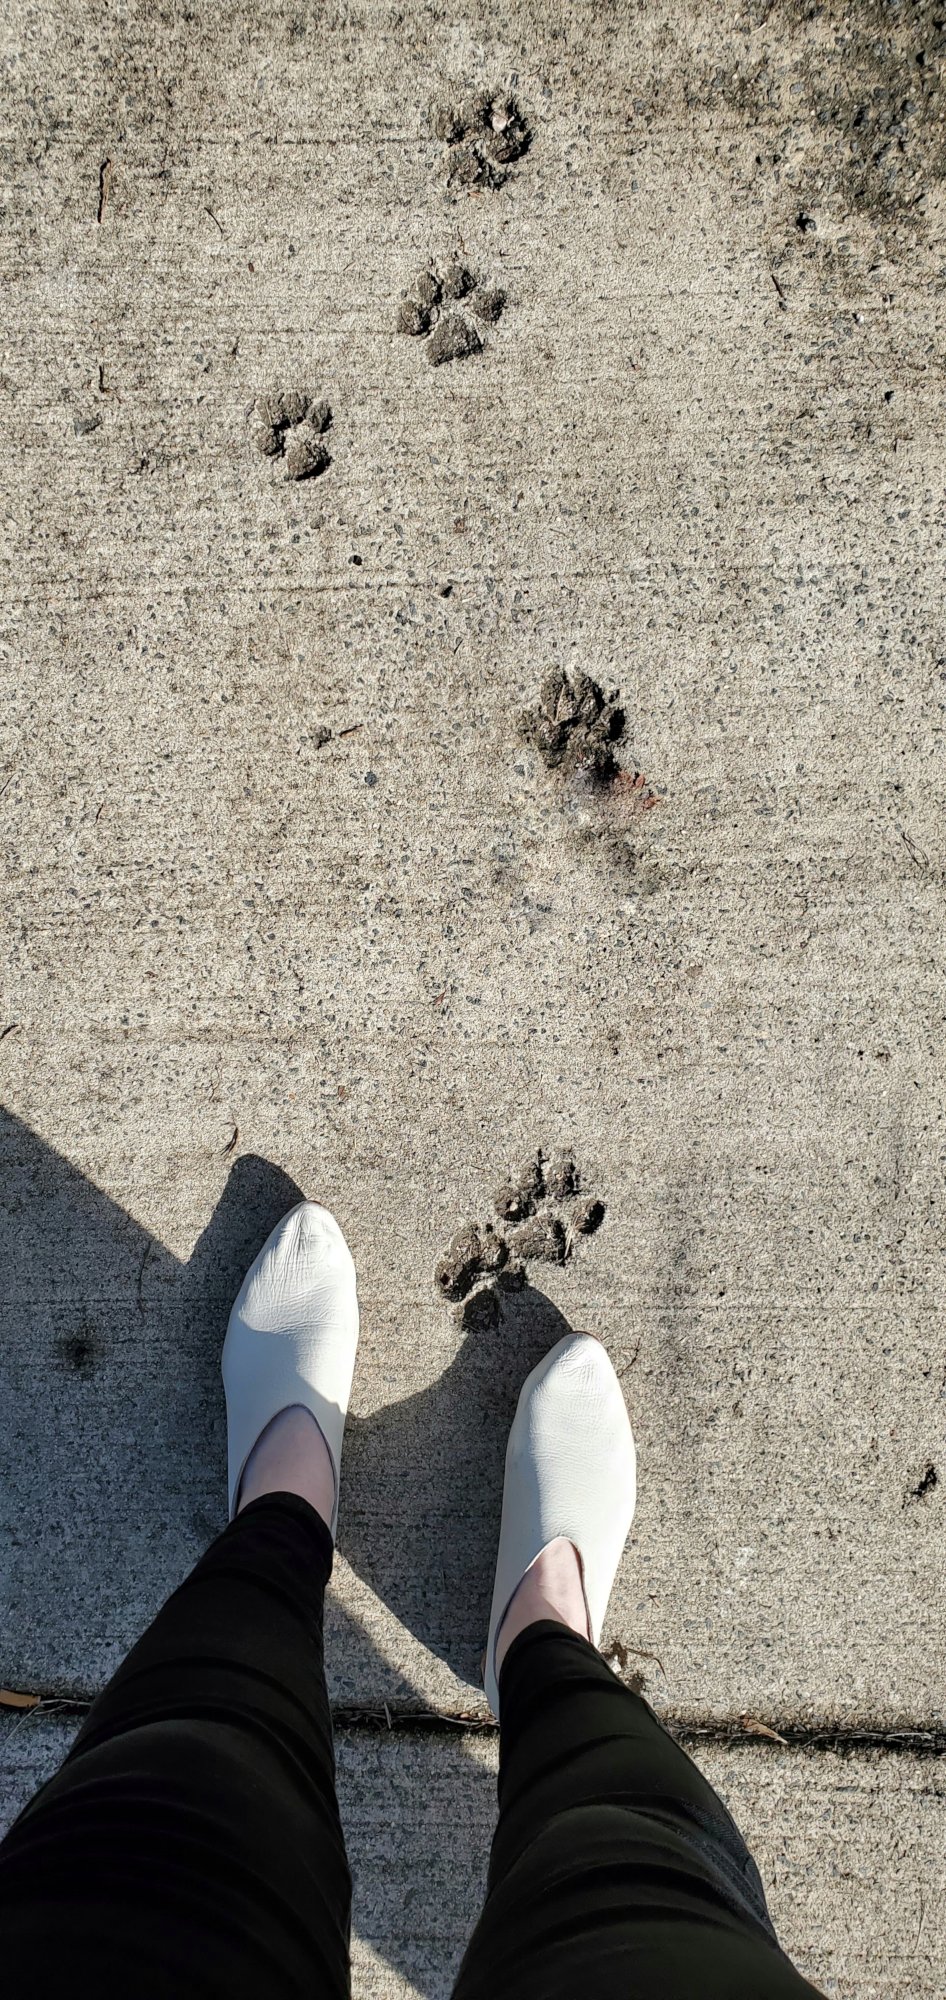 Alyssa is standing on the sidewalk in black skinny jeans and white shoes. There are cat or dog paw prints embedded in the concrete